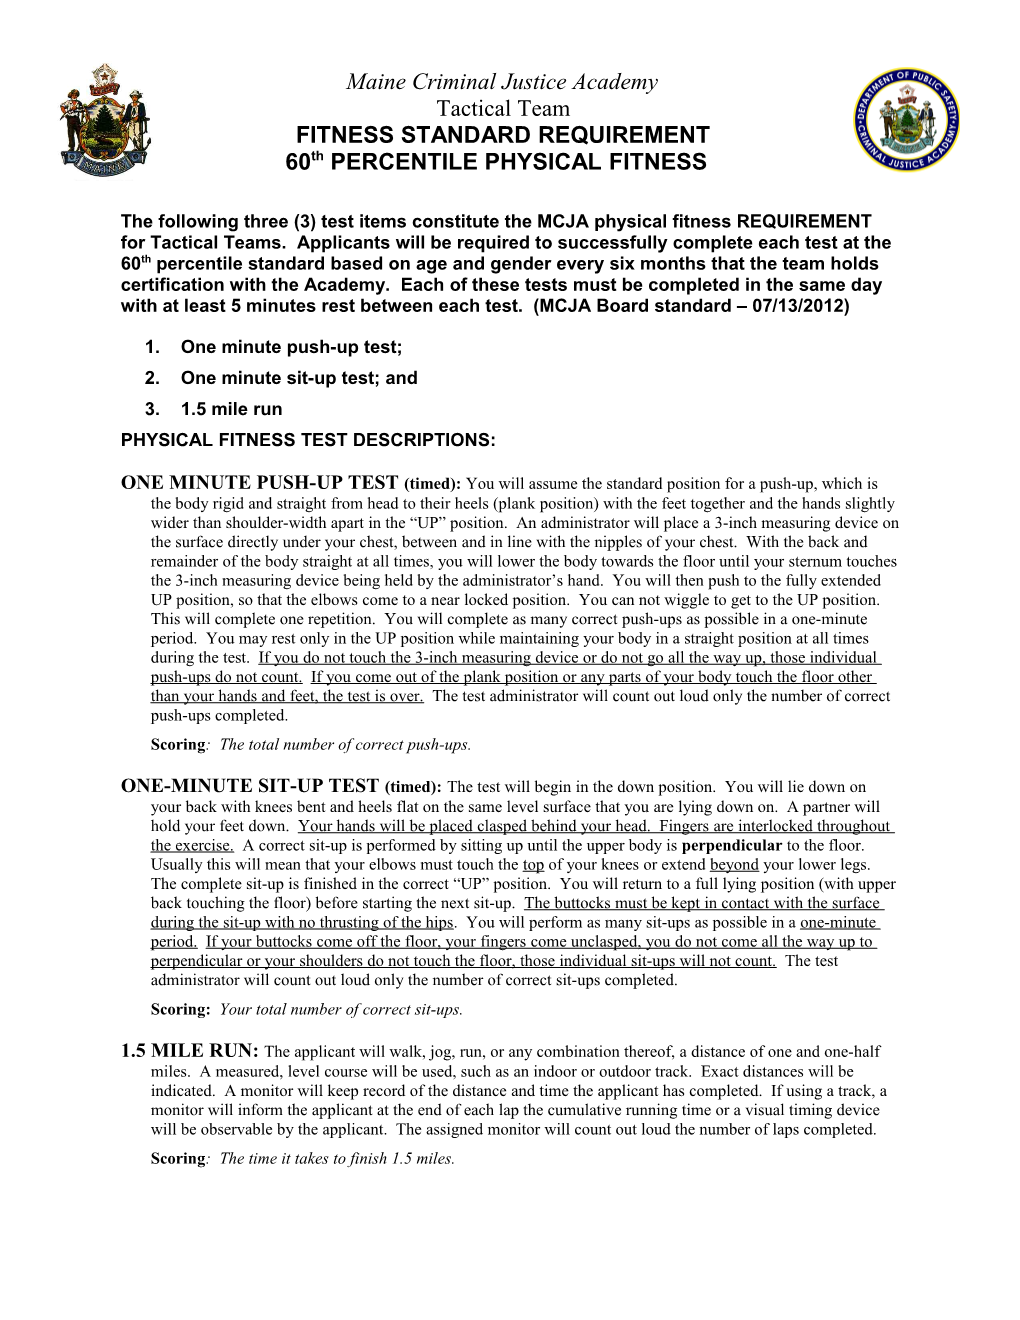 The Following Three (3) Test Items Constitute the MCJA Physical Fitness REQUIREMENT For